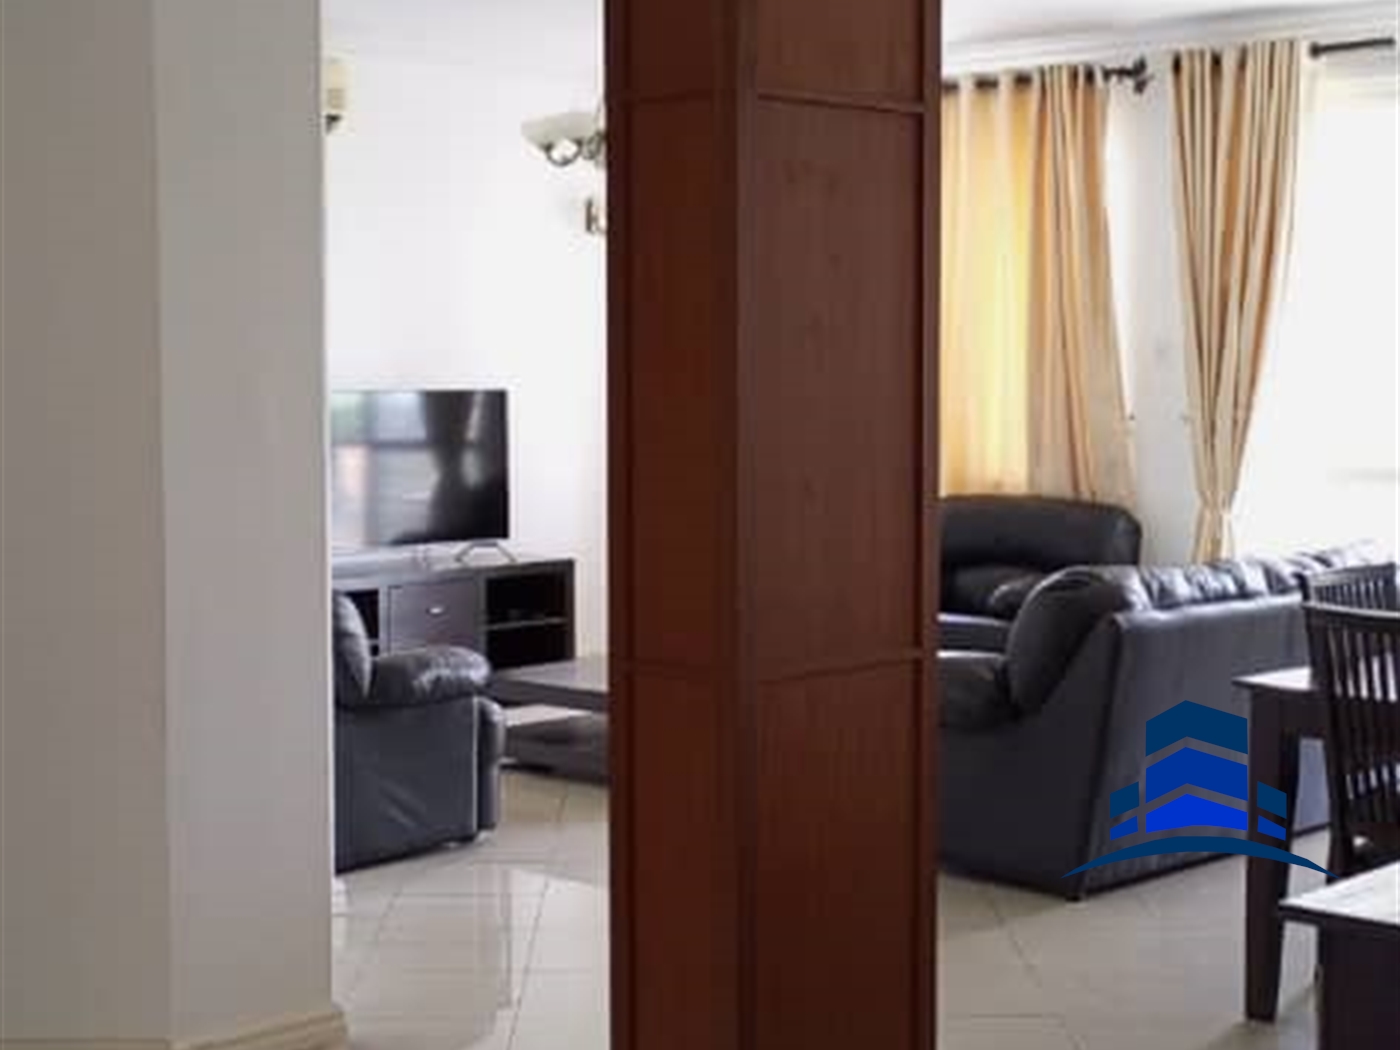 Hotel room for rent in Kololo Kampala